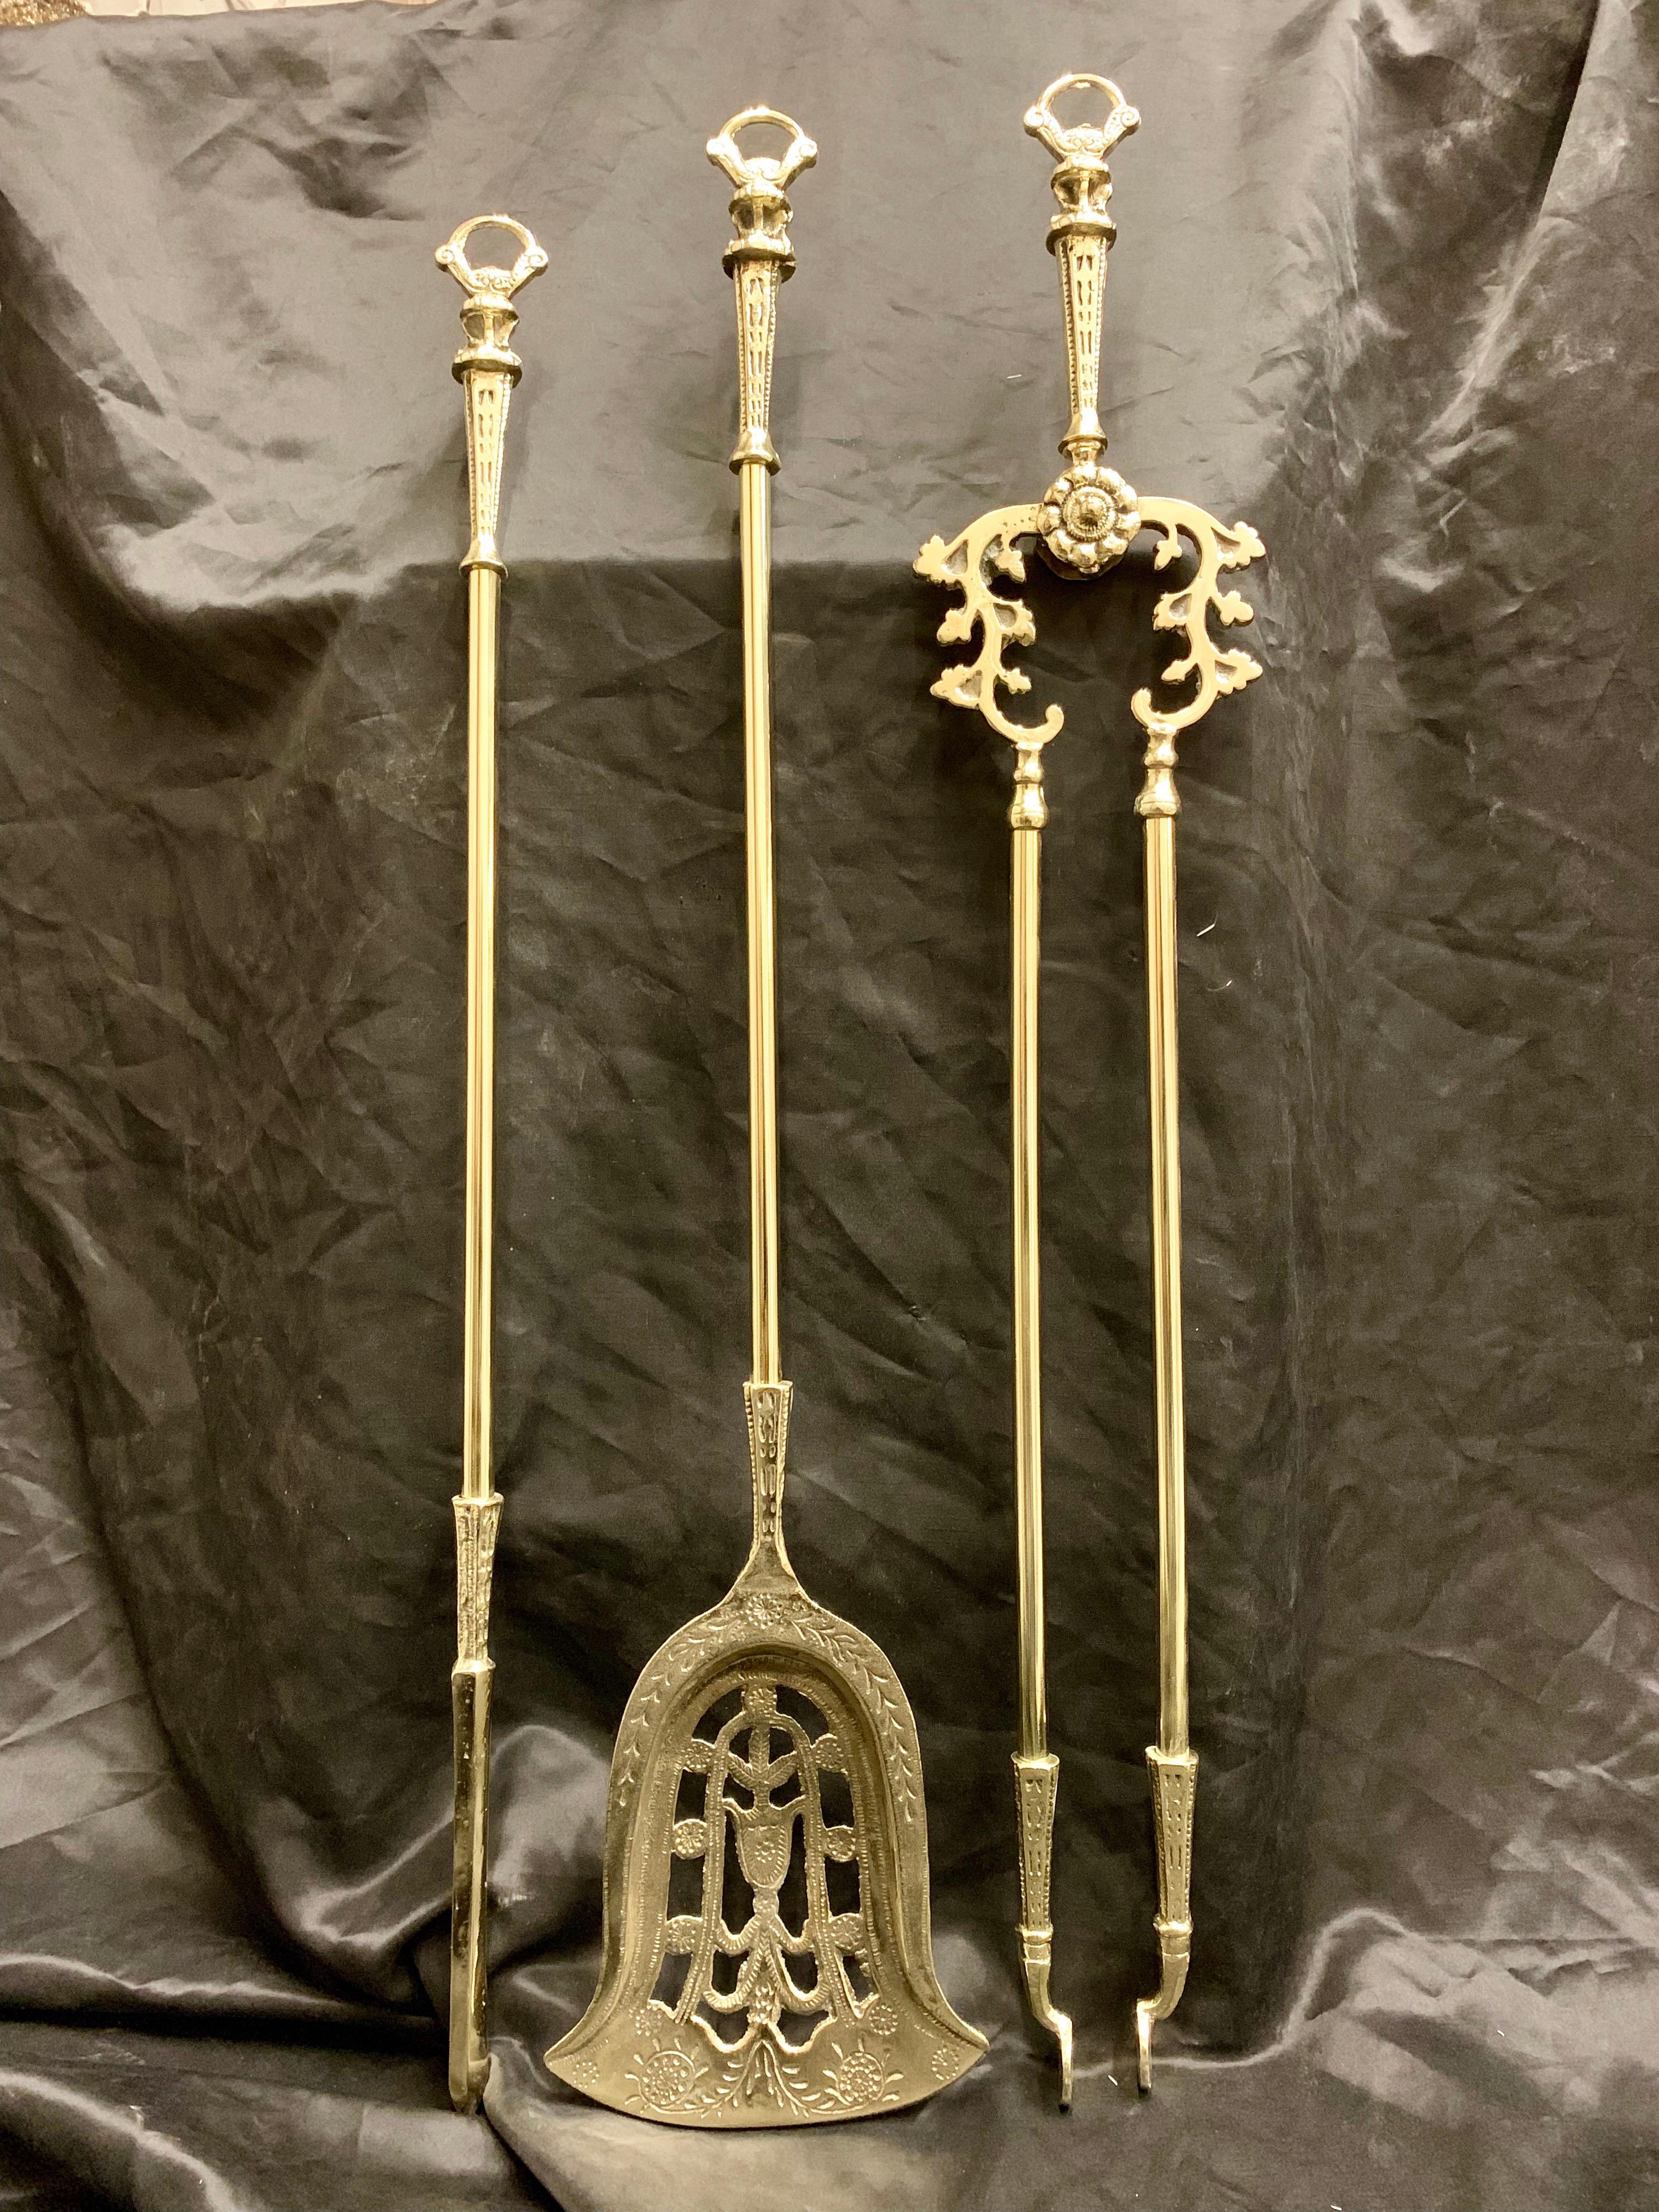 A set of three 19th century Victorian long polished brass fire irons consisting of a poker, a decoratively cast and pierced shovel with an etched rim, and a pair of tongs with rosette bosses, each with an ornate loop handle, could be hung up or laid